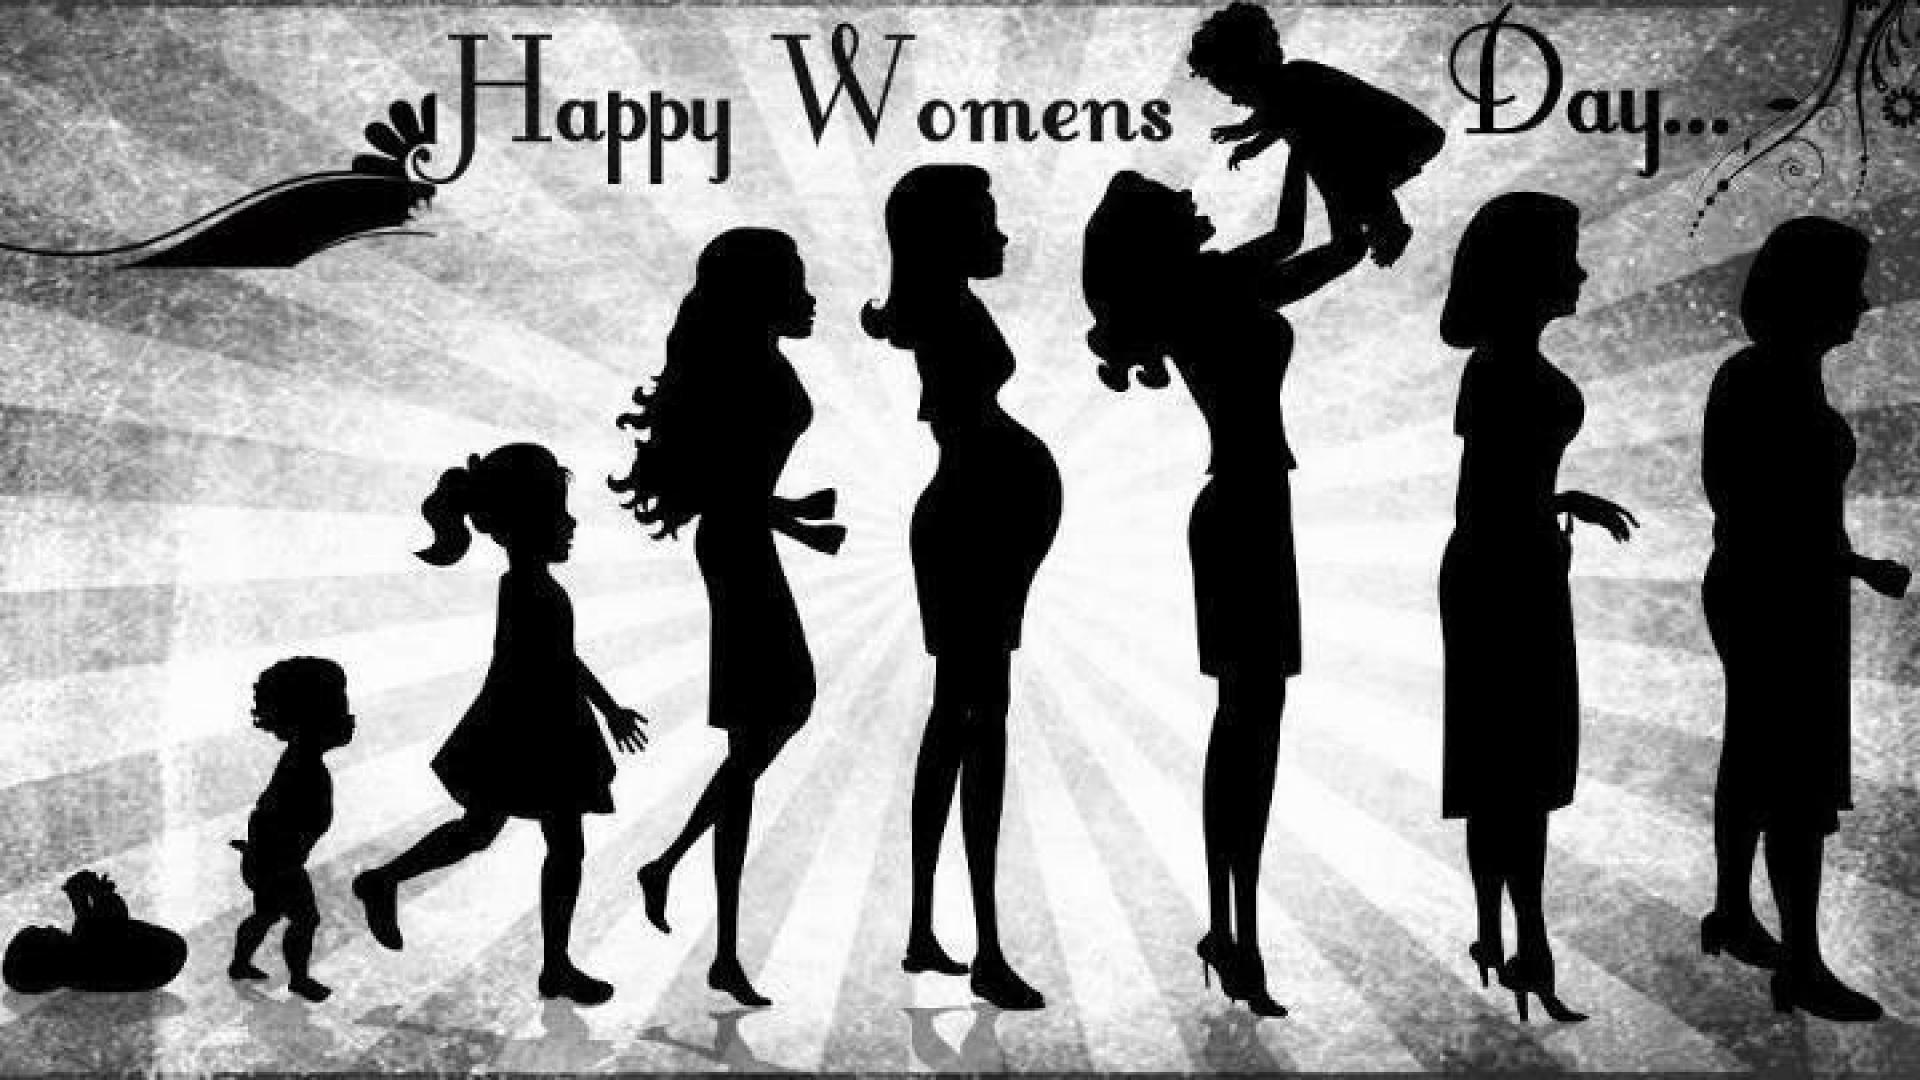 Happy Womens Day Wishes HD Image Wallpaper For Whatsapp Facebook